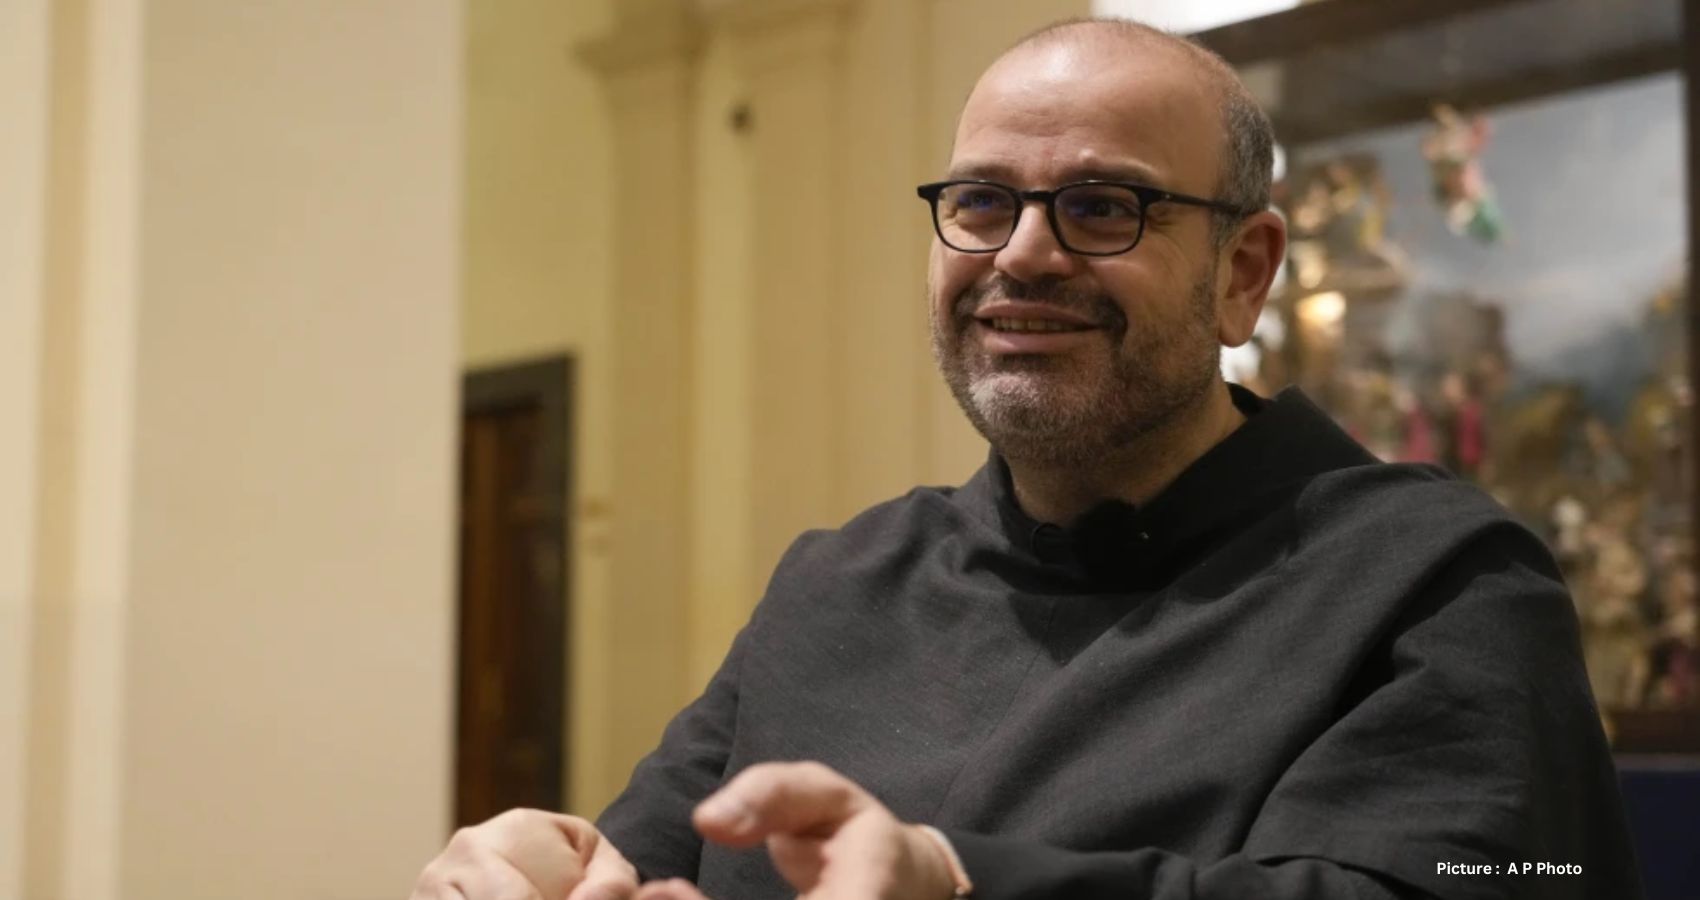 Featured & Cover  Vatican's Tech Ethicist Friar Paolo Benanti Advocates for Ethical AI Governance